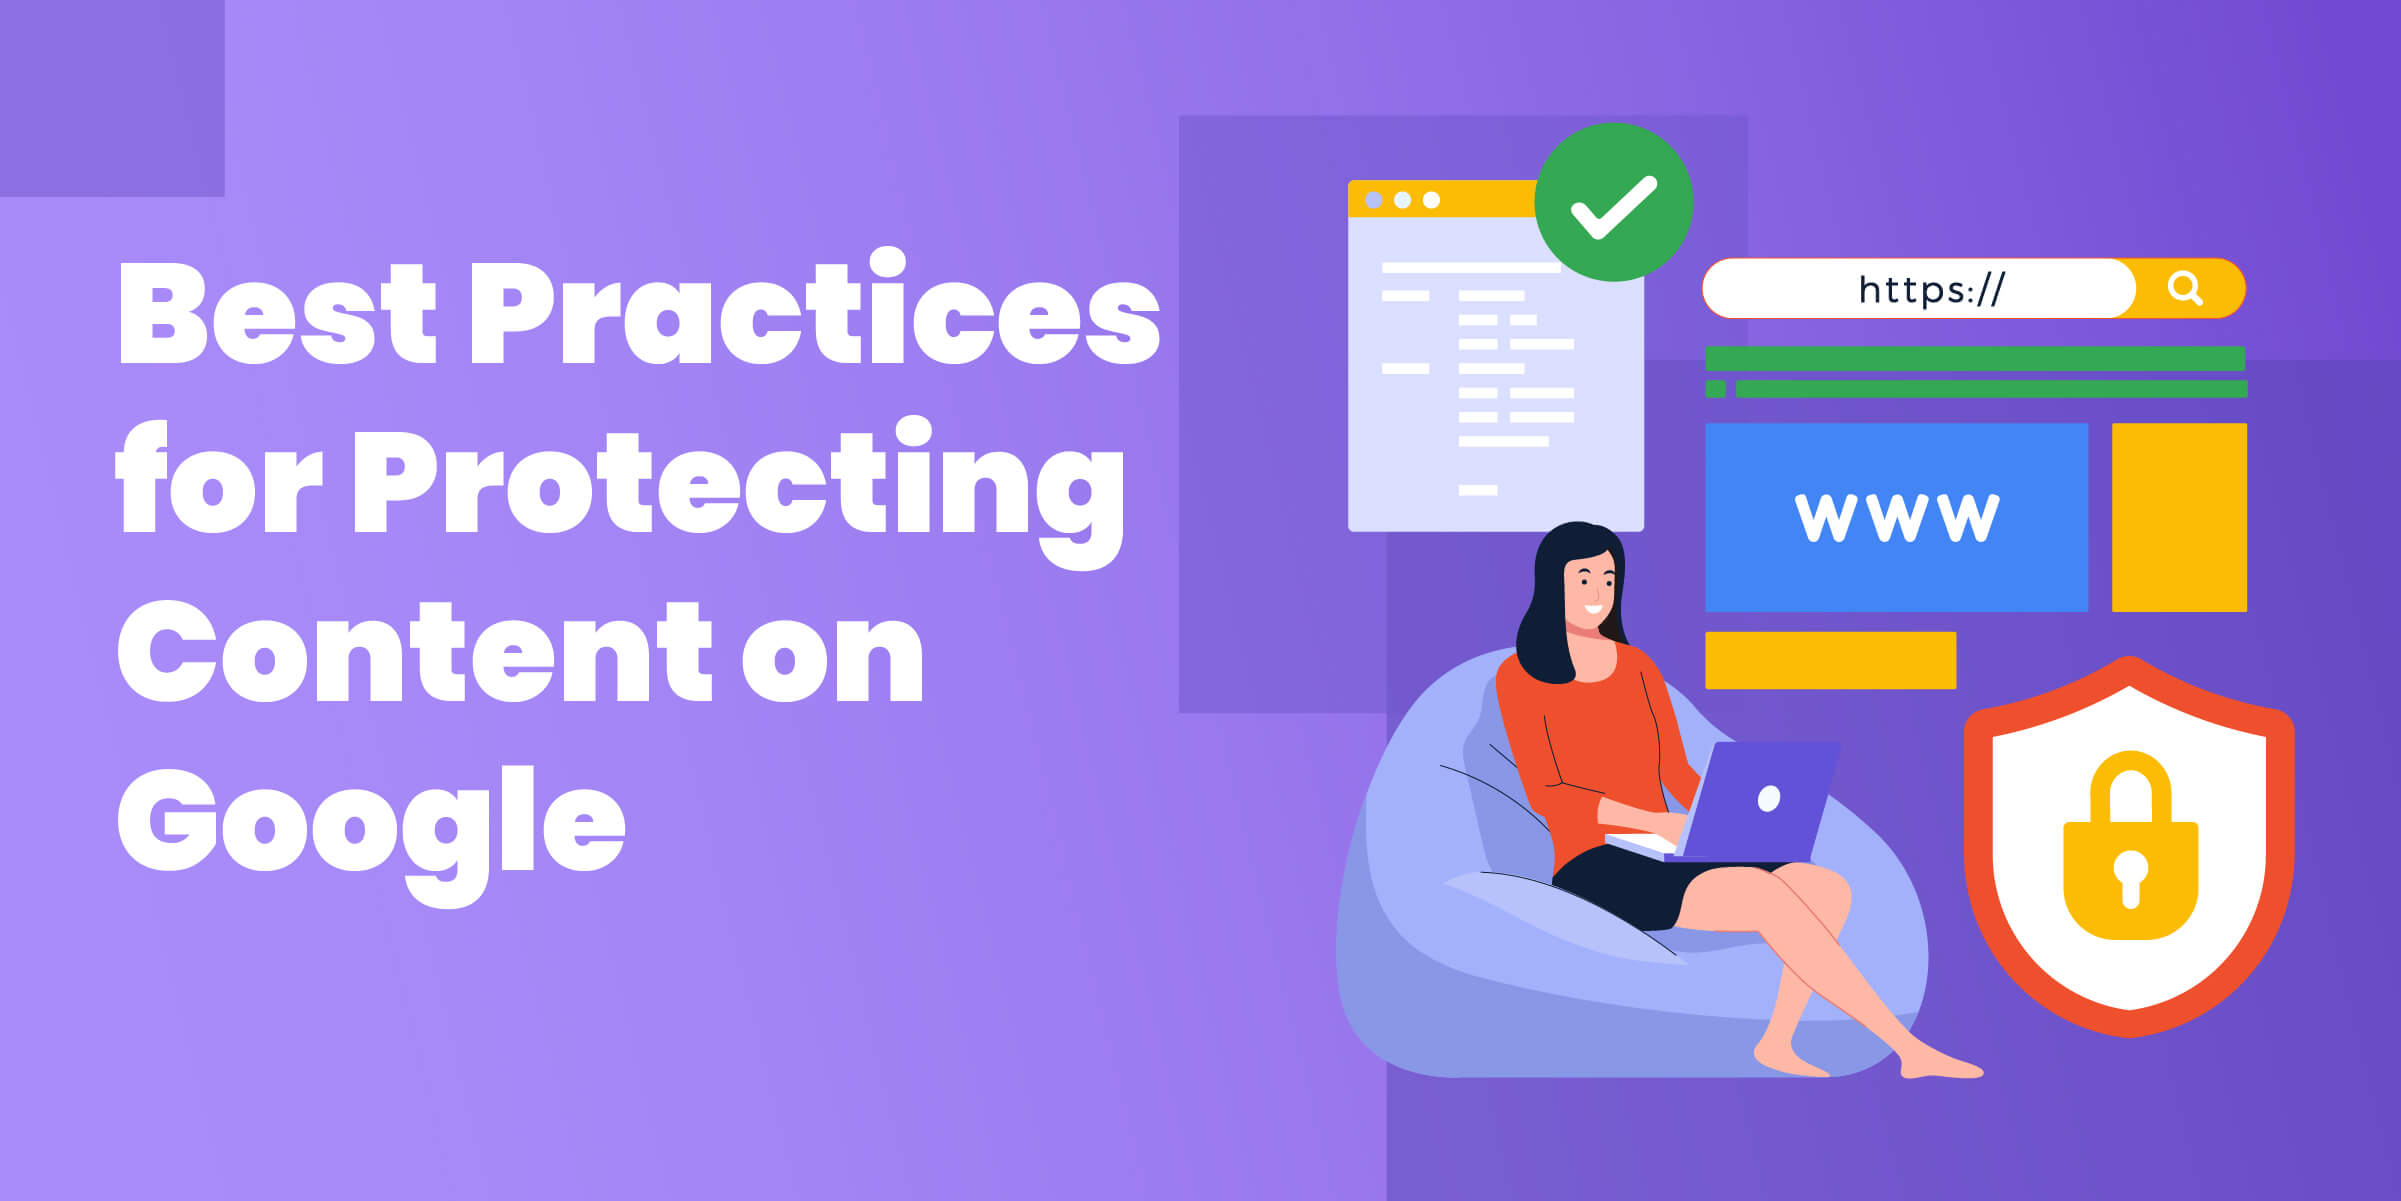 Best Practices for Protecting Content on Google